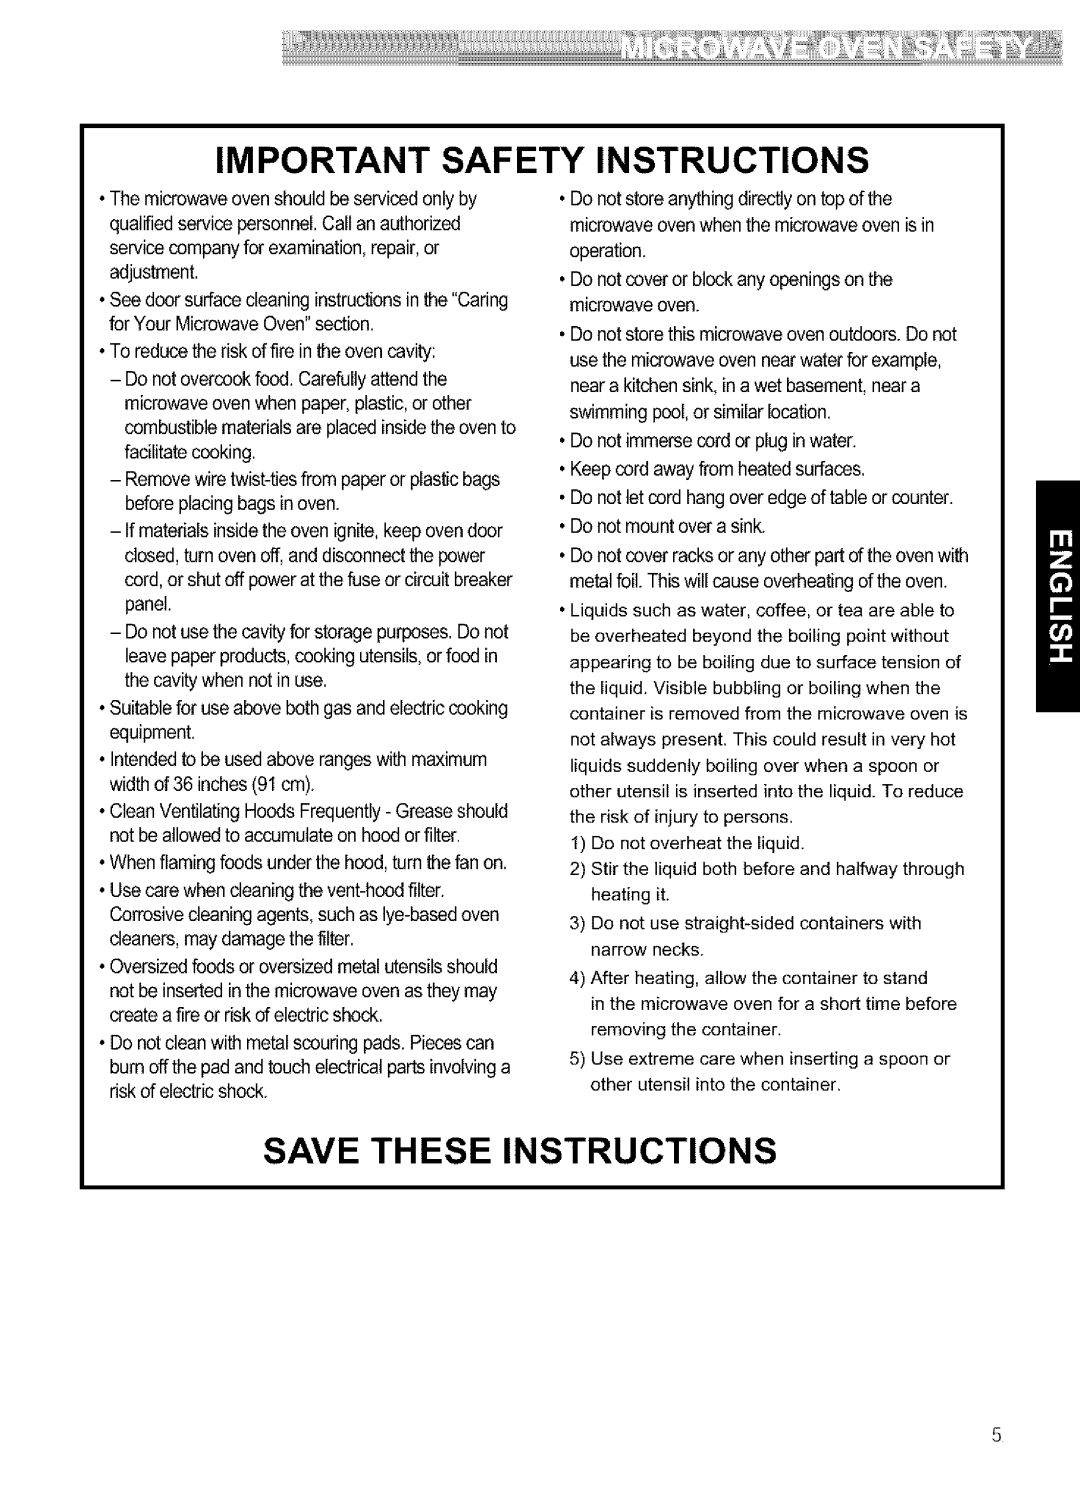 Kenmore 721.64684 Important Safety Instructions, Save These Instructions, •To reducethe riskof fire inthe oven cavity 